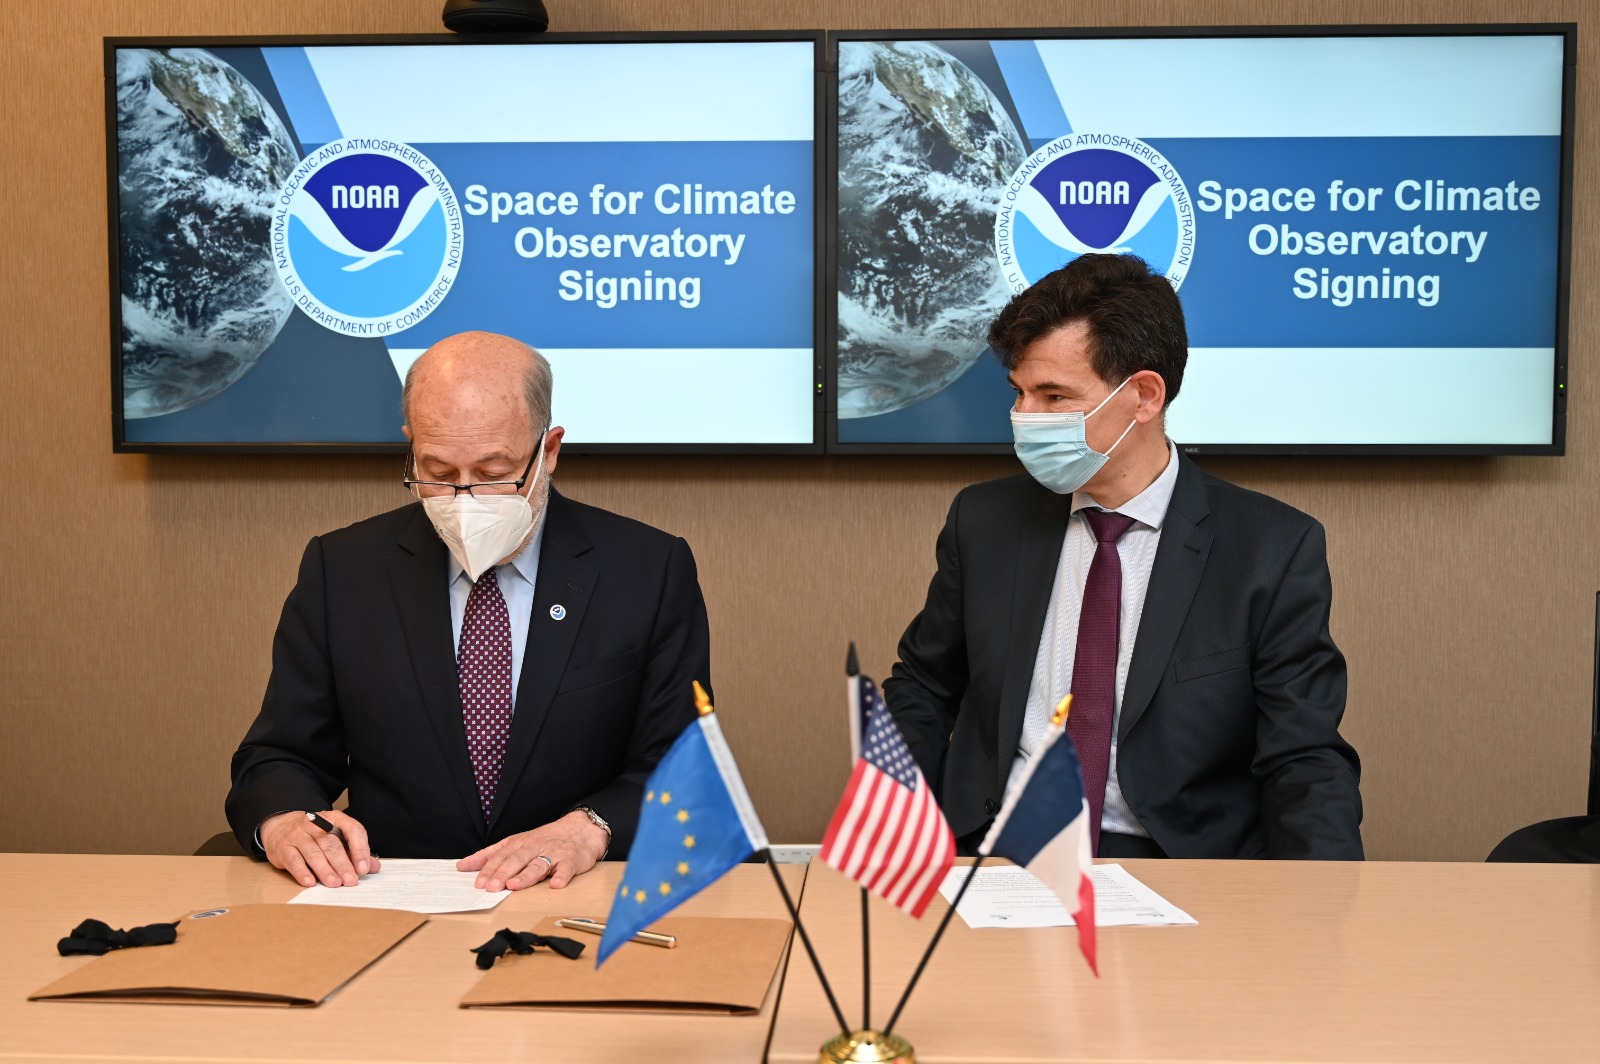 NOAA Administrator Dr. Rick Spinrad (L) signs the Space for Climate Observatory charter, as Dr. Philippe Baptiste, Chairman and CEO of the French National Center for Space Studies (CNES), looks on.